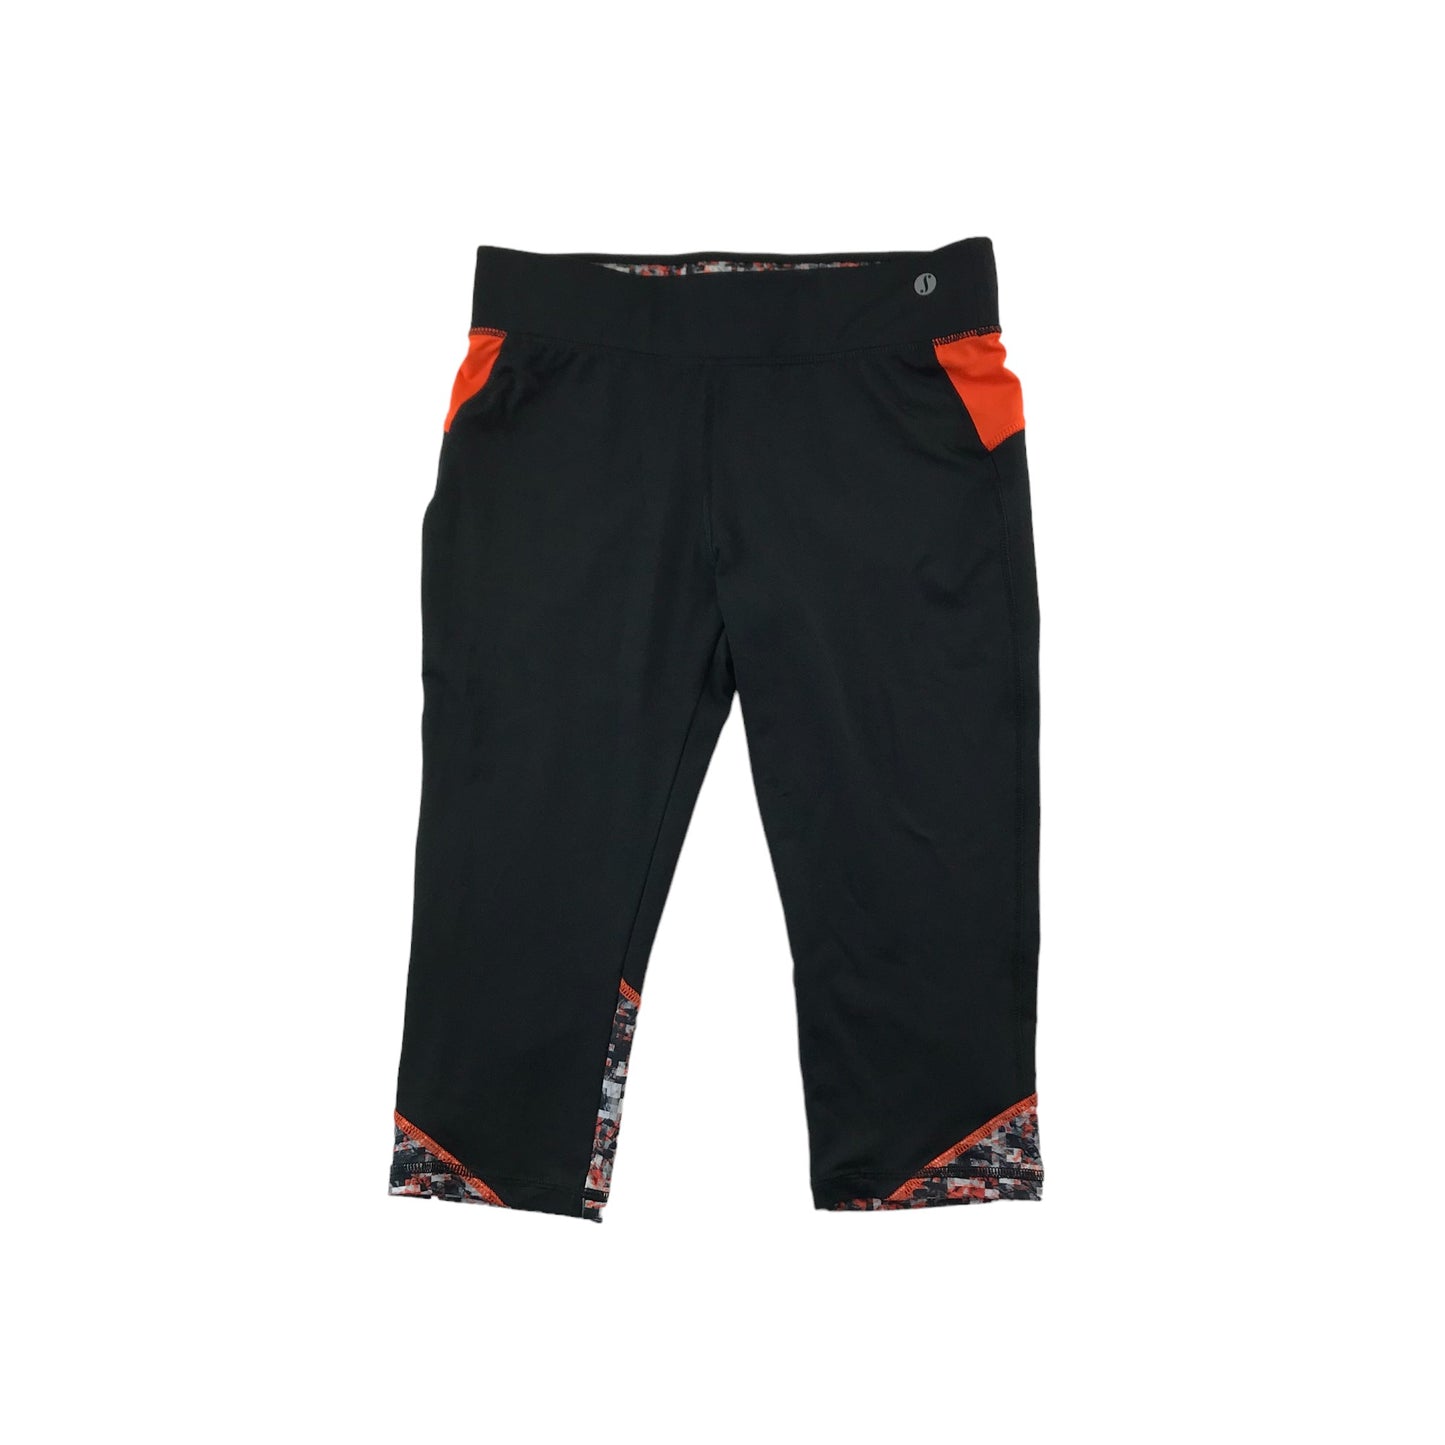 New Look Sport Set Size Women's M Black and Orange Top and Cropped Leggings